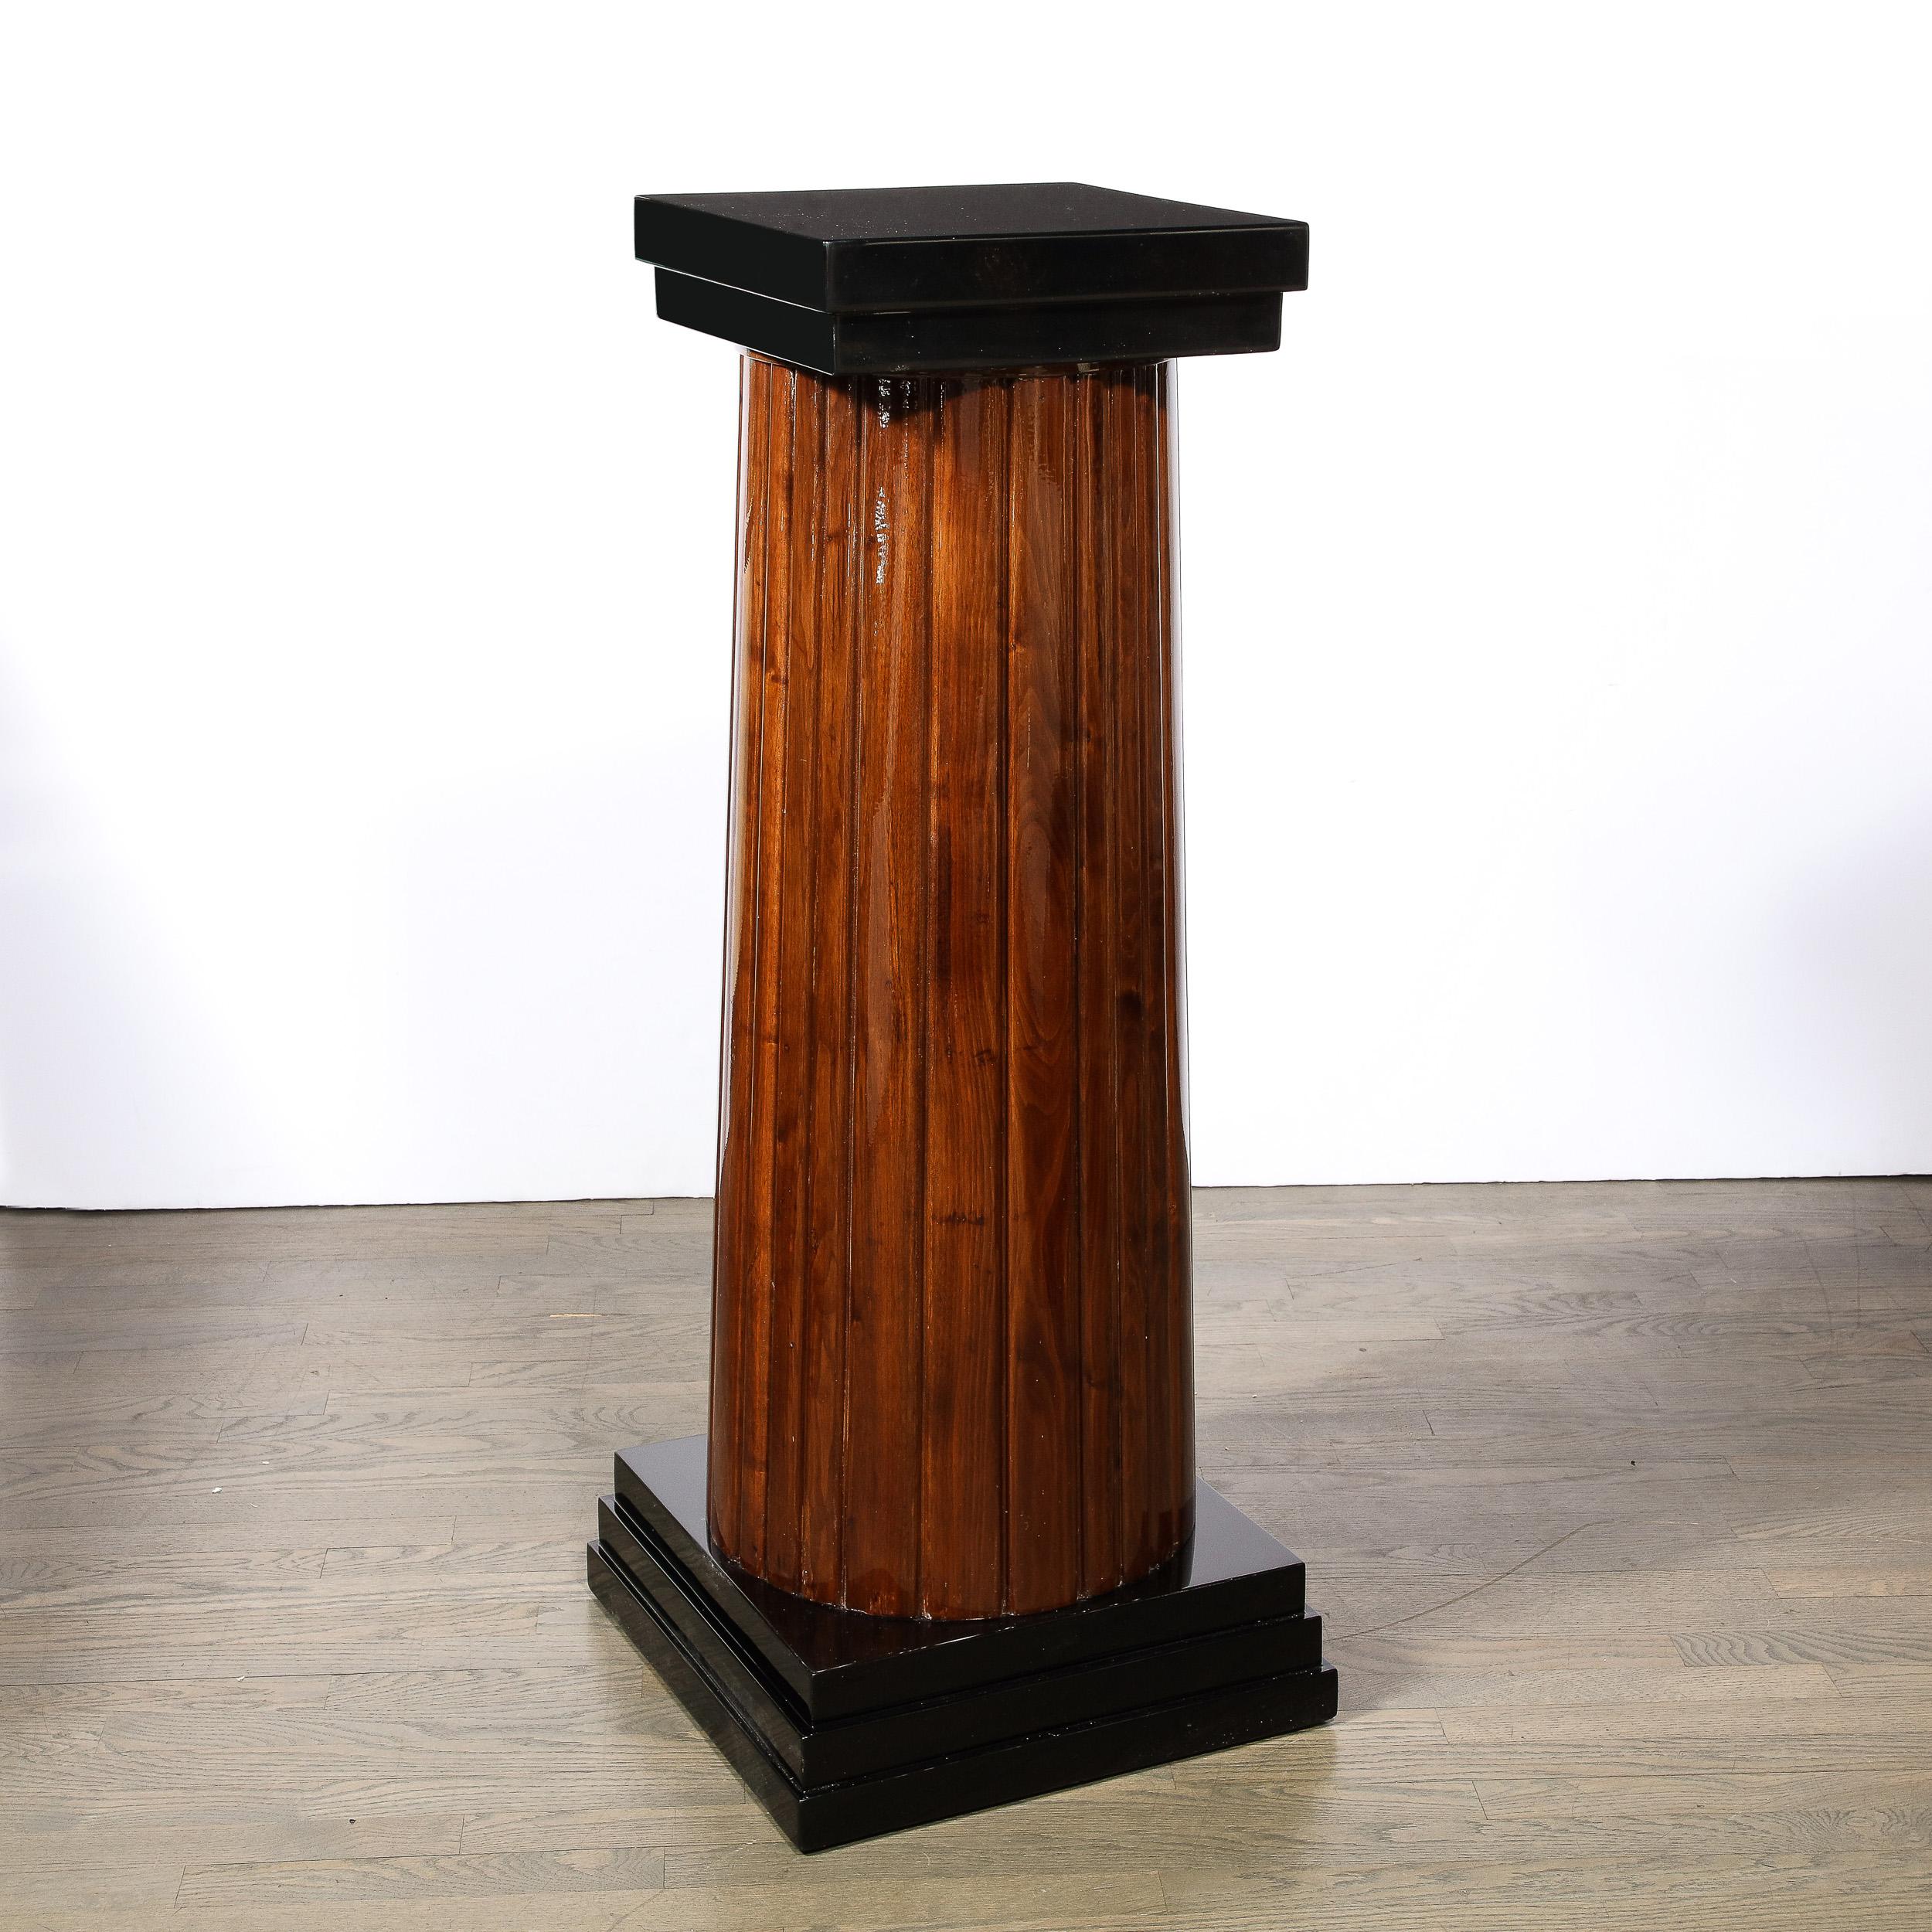 Monumental Art Deco Pedestal with Fluted Detailing in Walnut and Black Lacquer For Sale 8